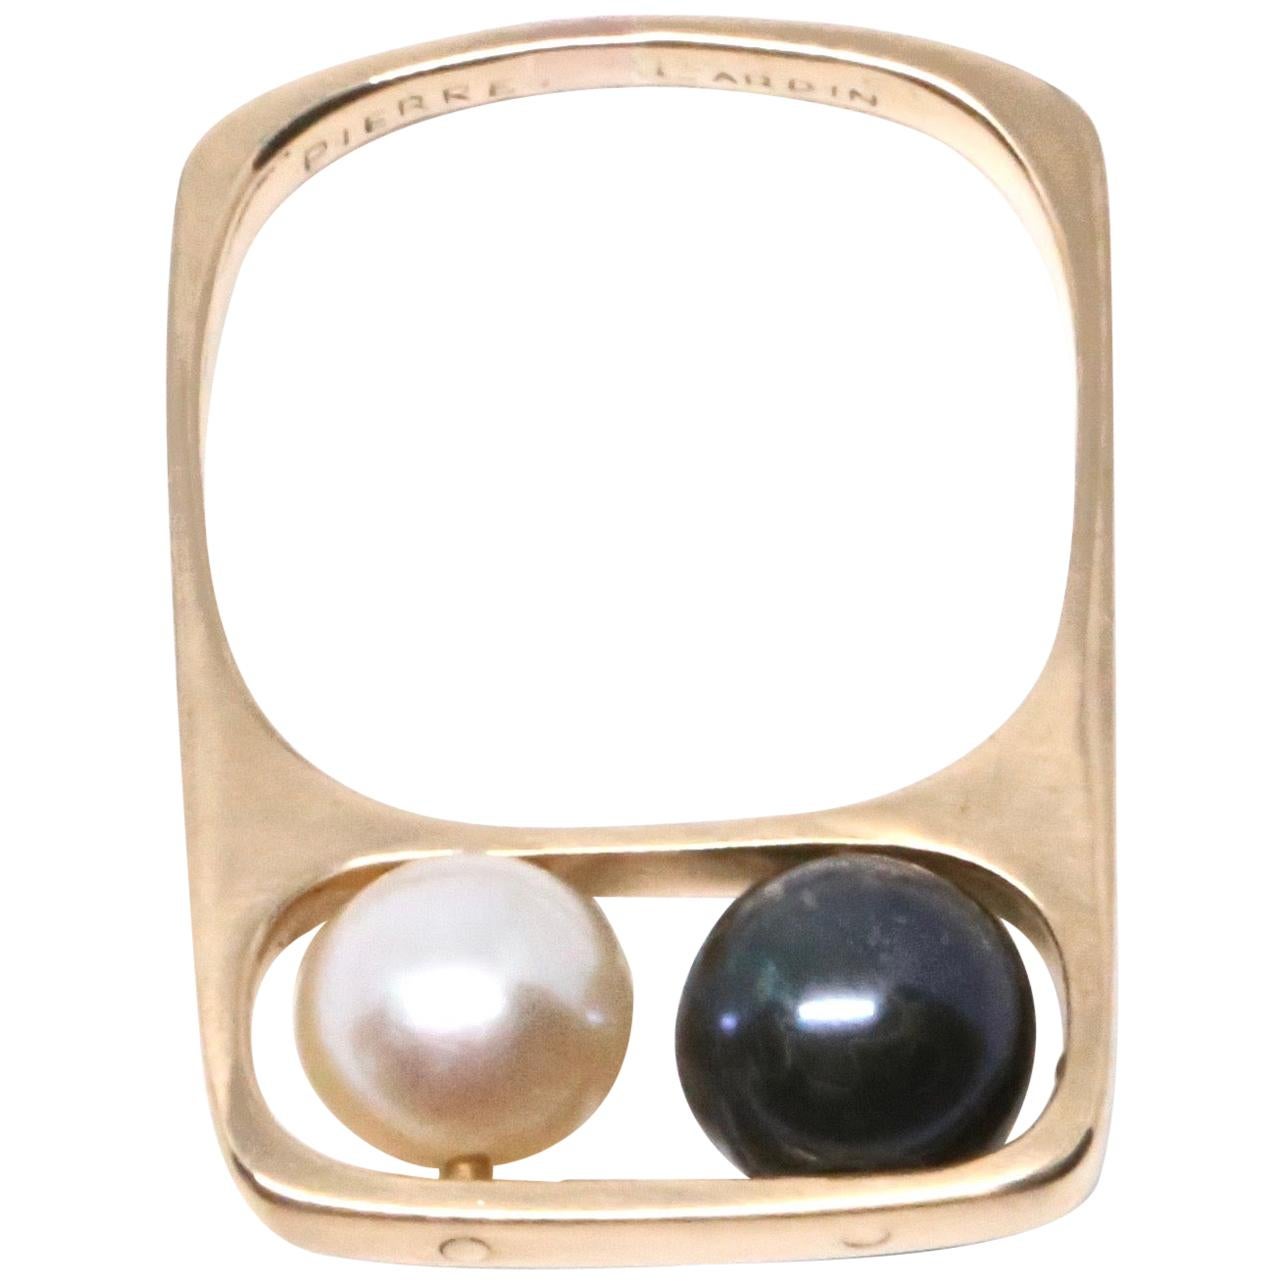 1960s Jean Dinh Van for Pierre Cardin 18 Karat Gold Ring with Movable Pearls